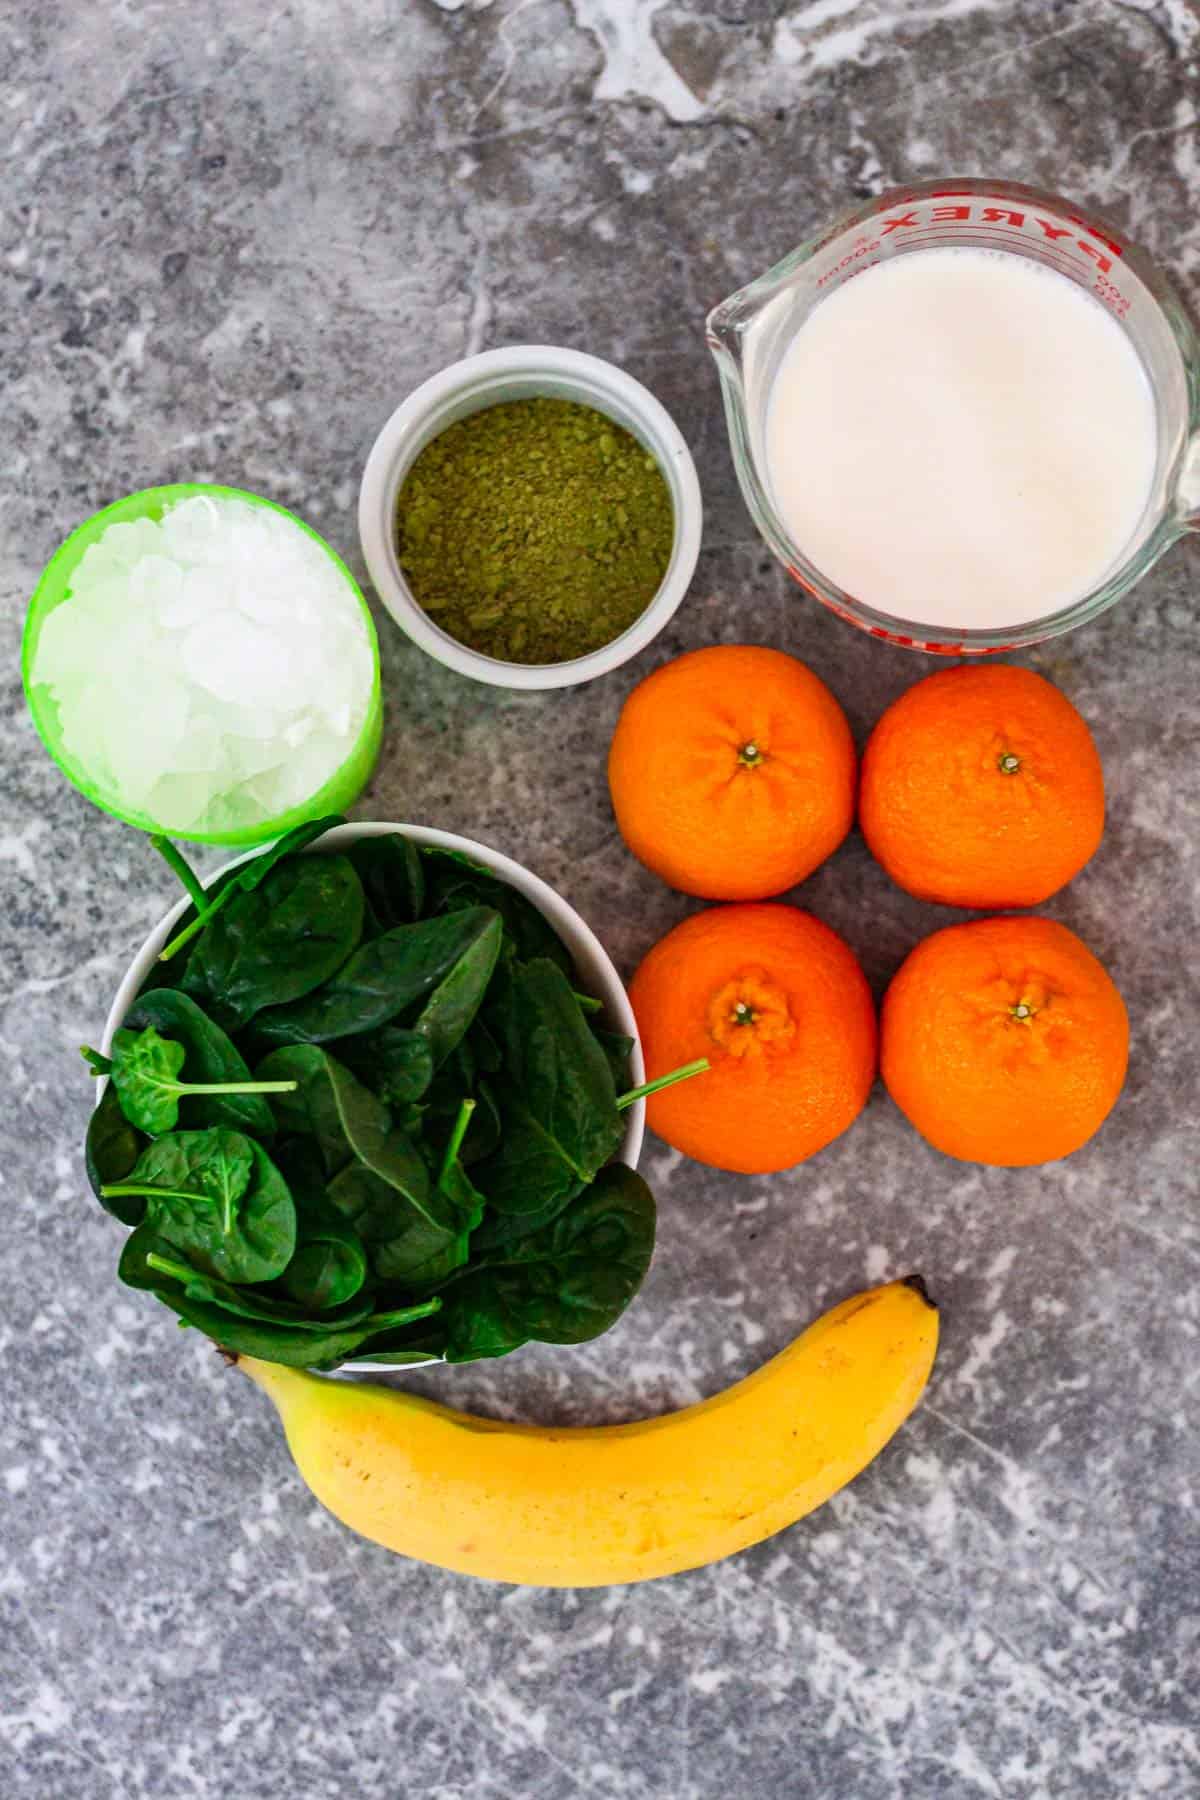 Ingredients for two smoothies: ice, matcha powder, milk, spinach, mandarins and banana.